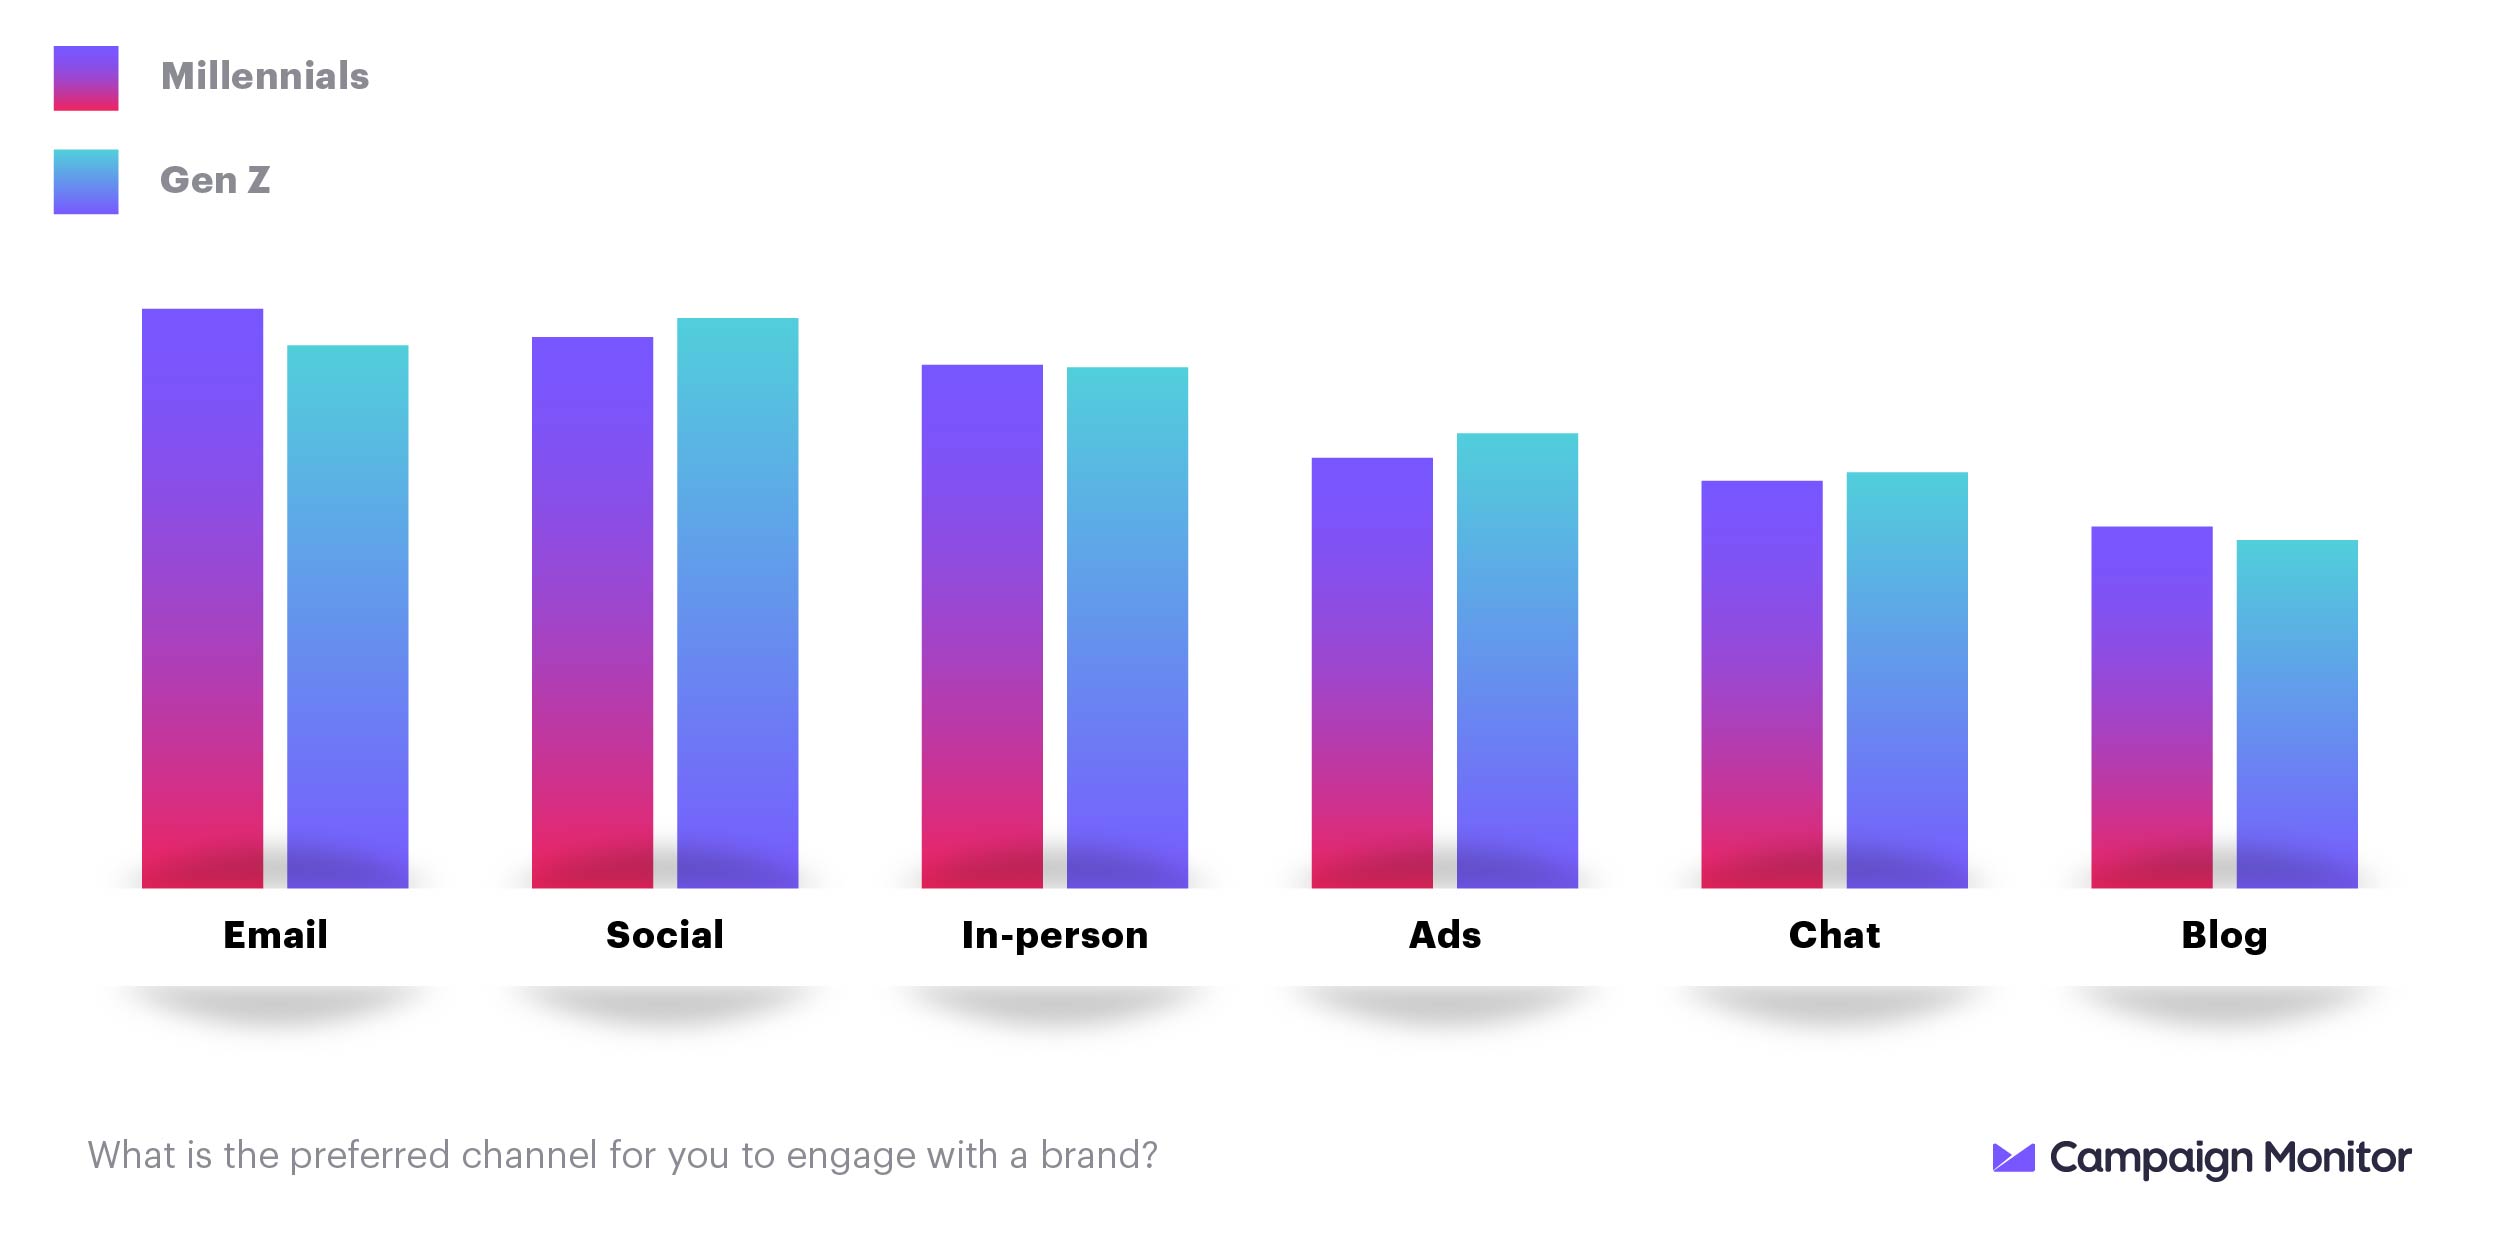 Looking at preferred channels for brand engagement, millennials are a bit more inclined to email versus social, while Gen Z is skewed a bit more oppositely. The other channels mentioned received very similar interest.